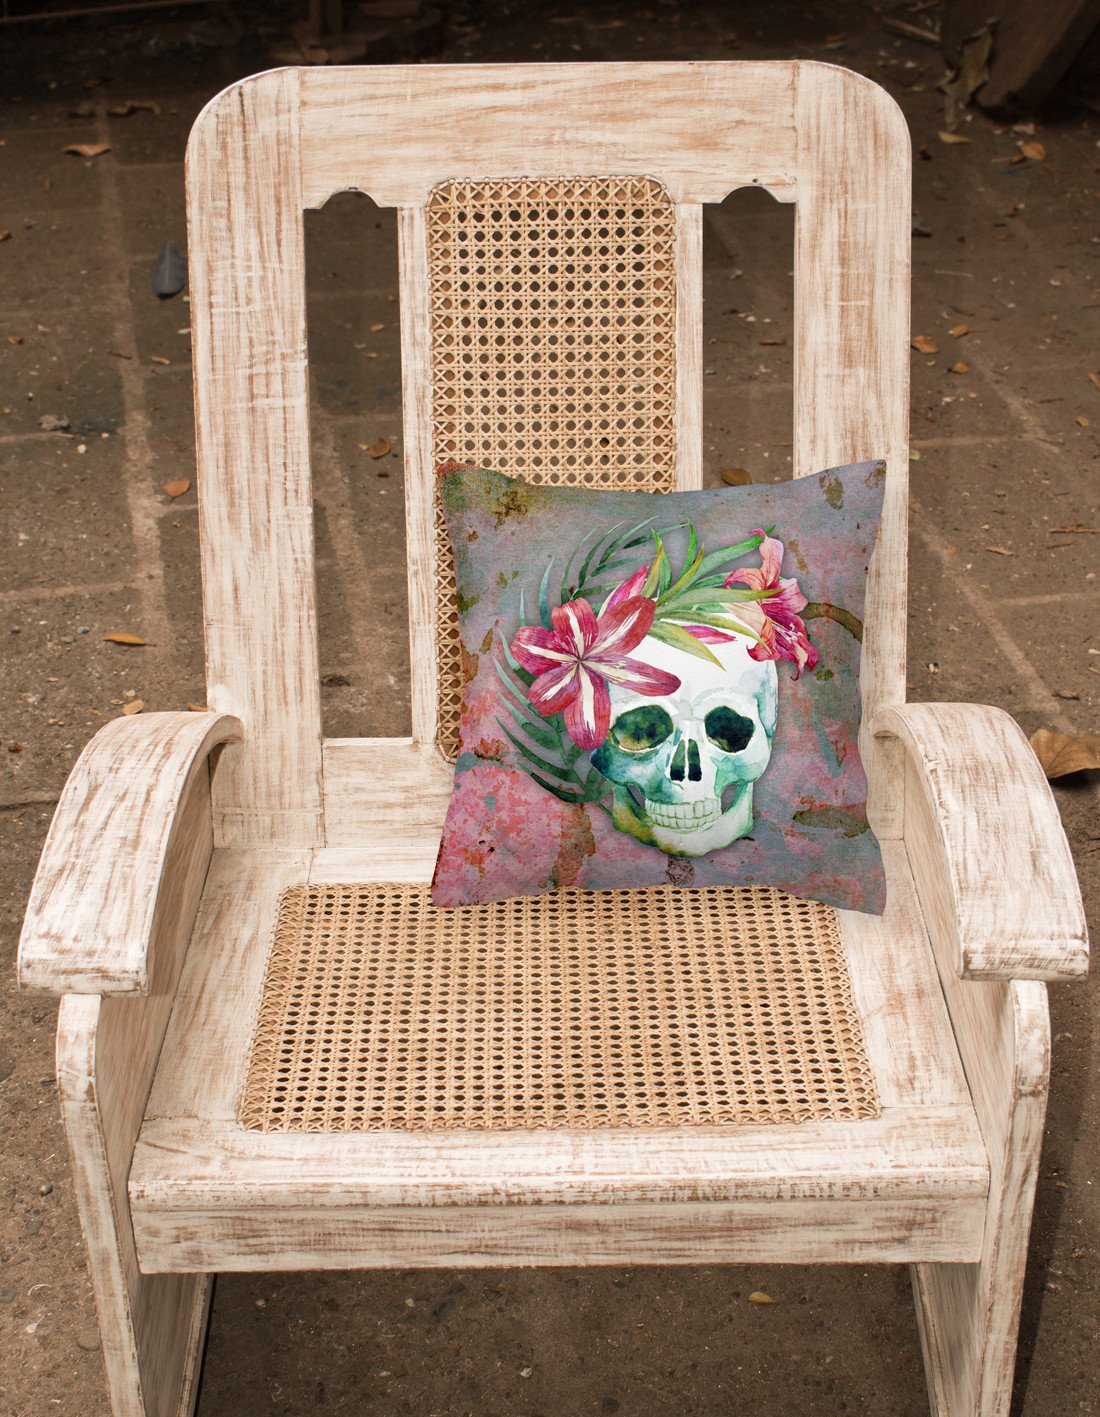 Day of the Dead Skull Flowers Fabric Decorative Pillow BB5125PW1818 by Caroline's Treasures